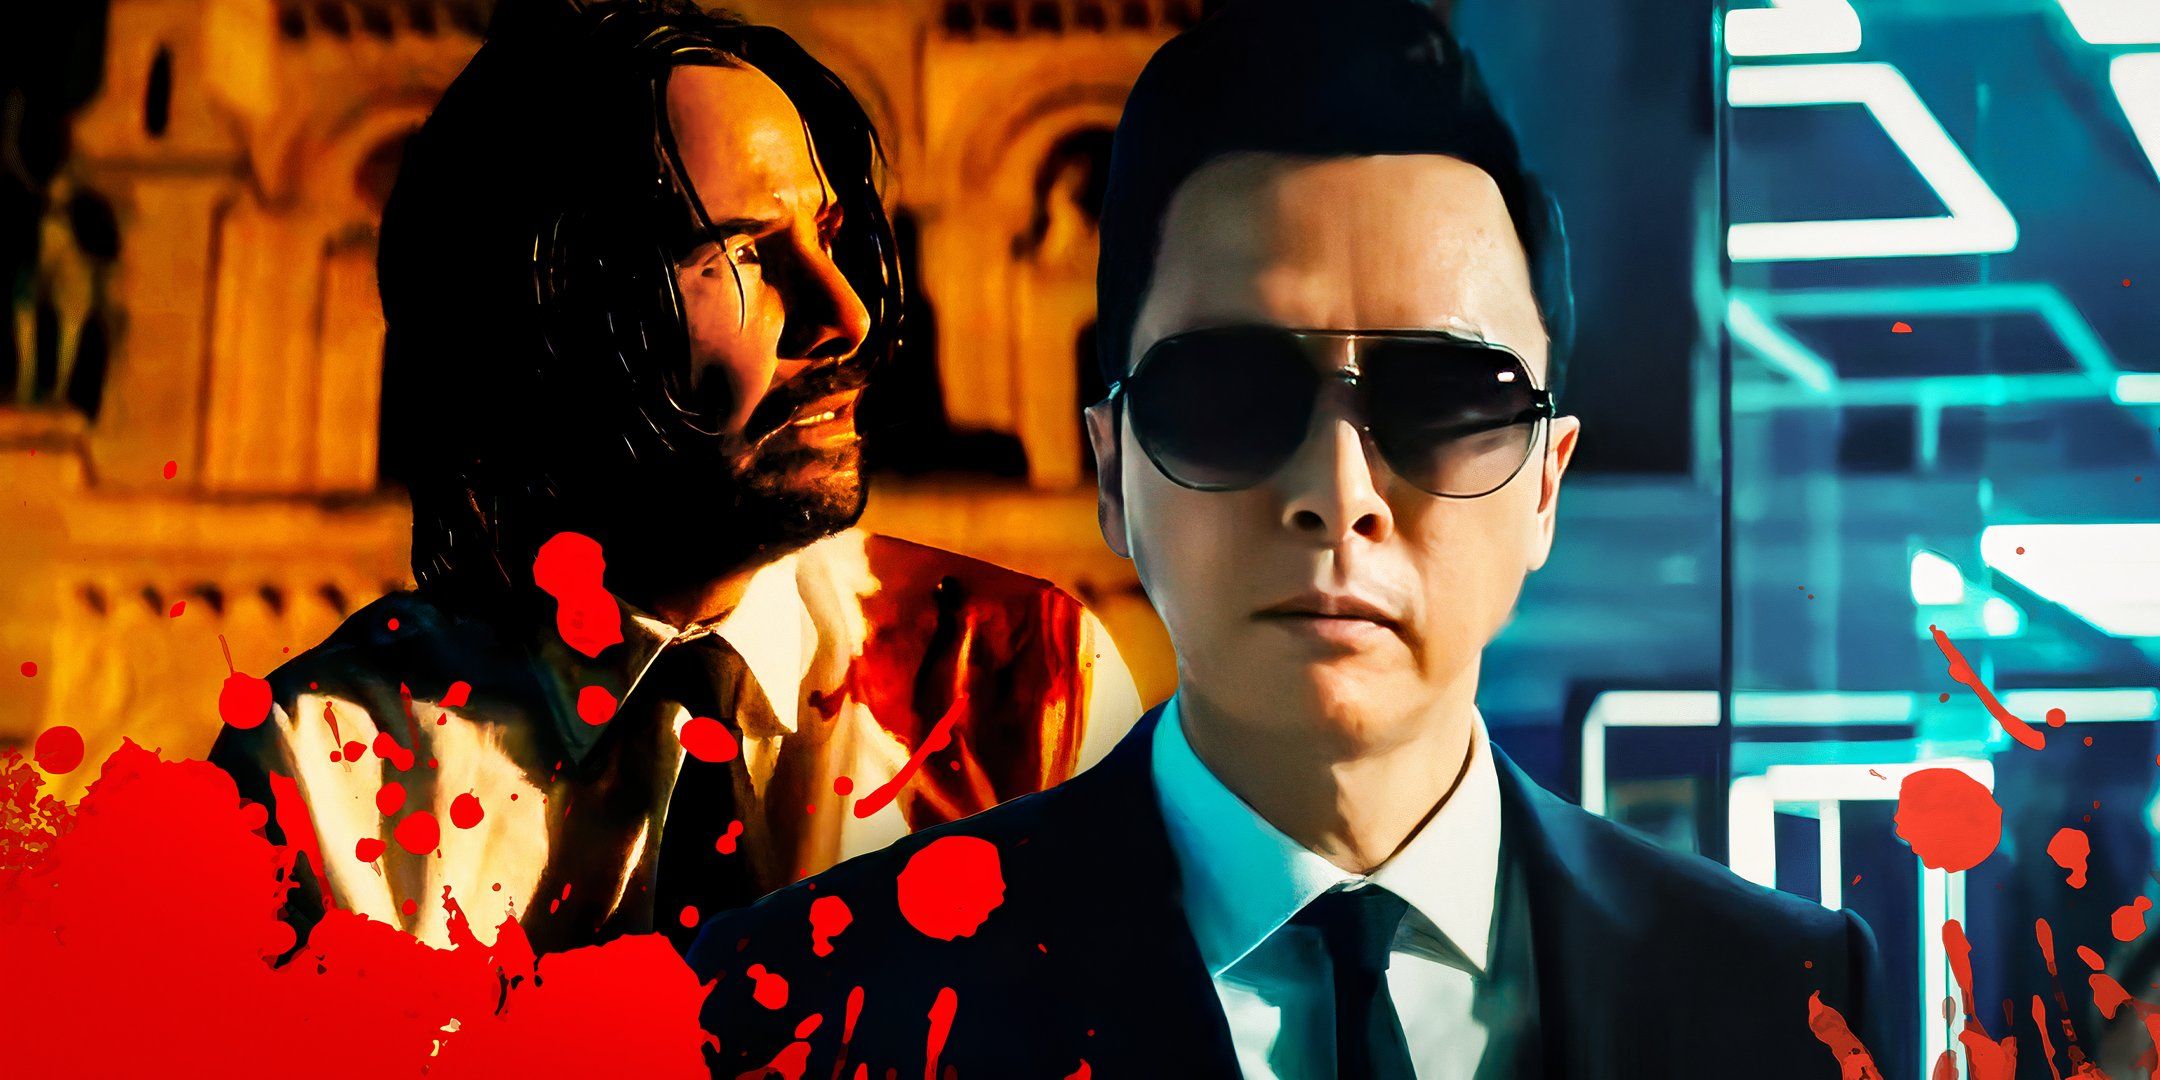 Donnie Yen's Caine from John Wick 4 and Keanu Reeves from the ending